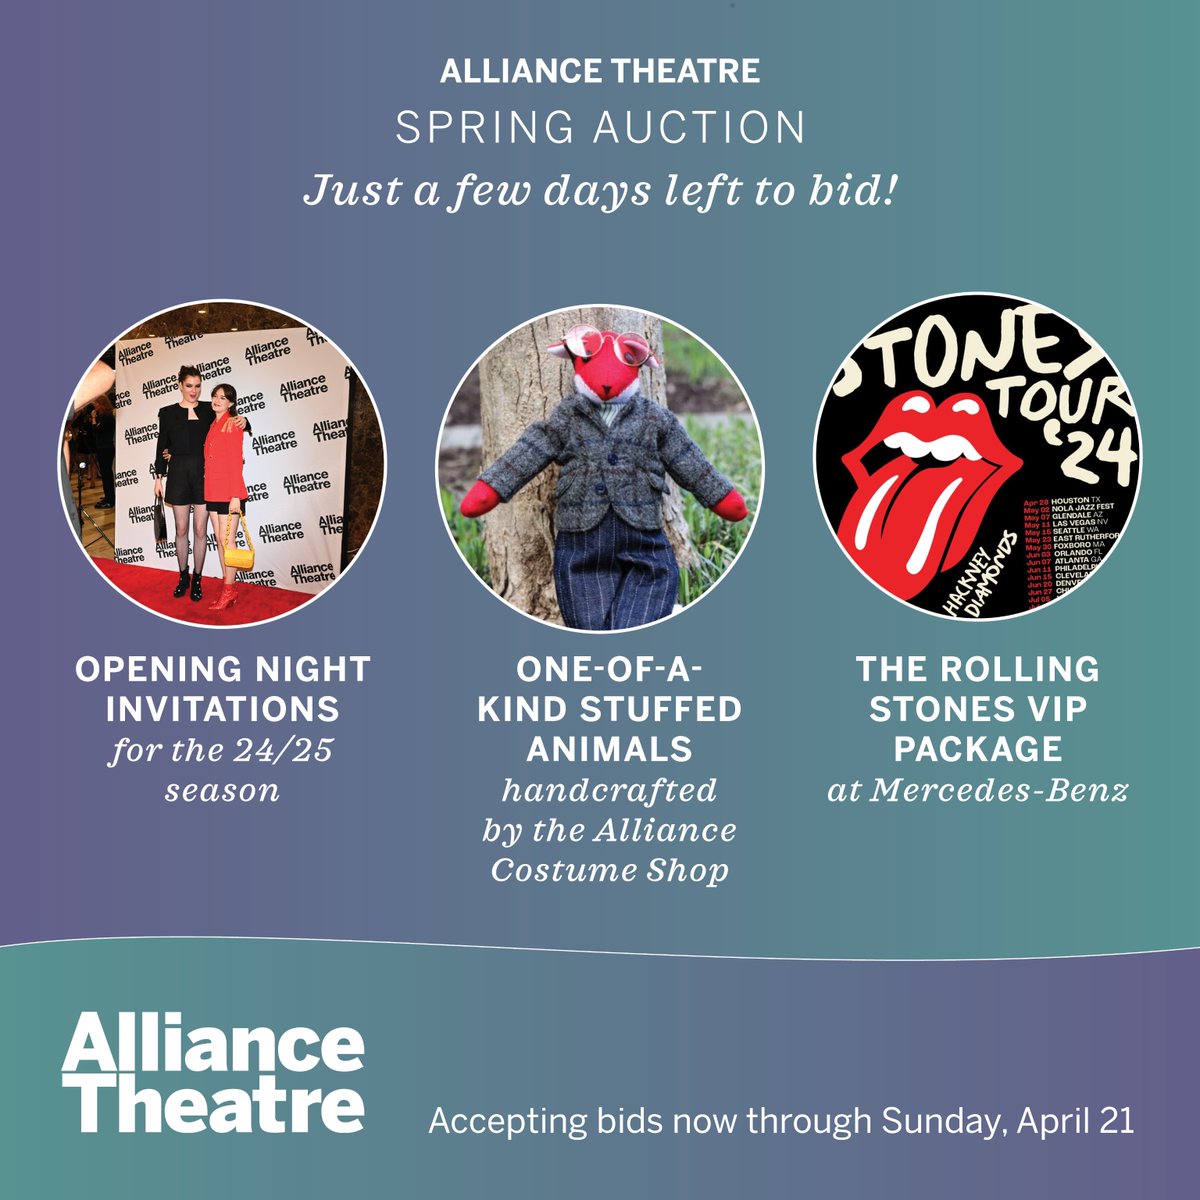 We're almost there! 🎭🎟️ Our annual auction closes this Sunday, April 21 @ 8 PM – so don't miss your chance to bid on any of these remaining lots! Visit the link to participate and win some amazing prizes! ✨ biddingforgood.com/alliancetheatre ✨